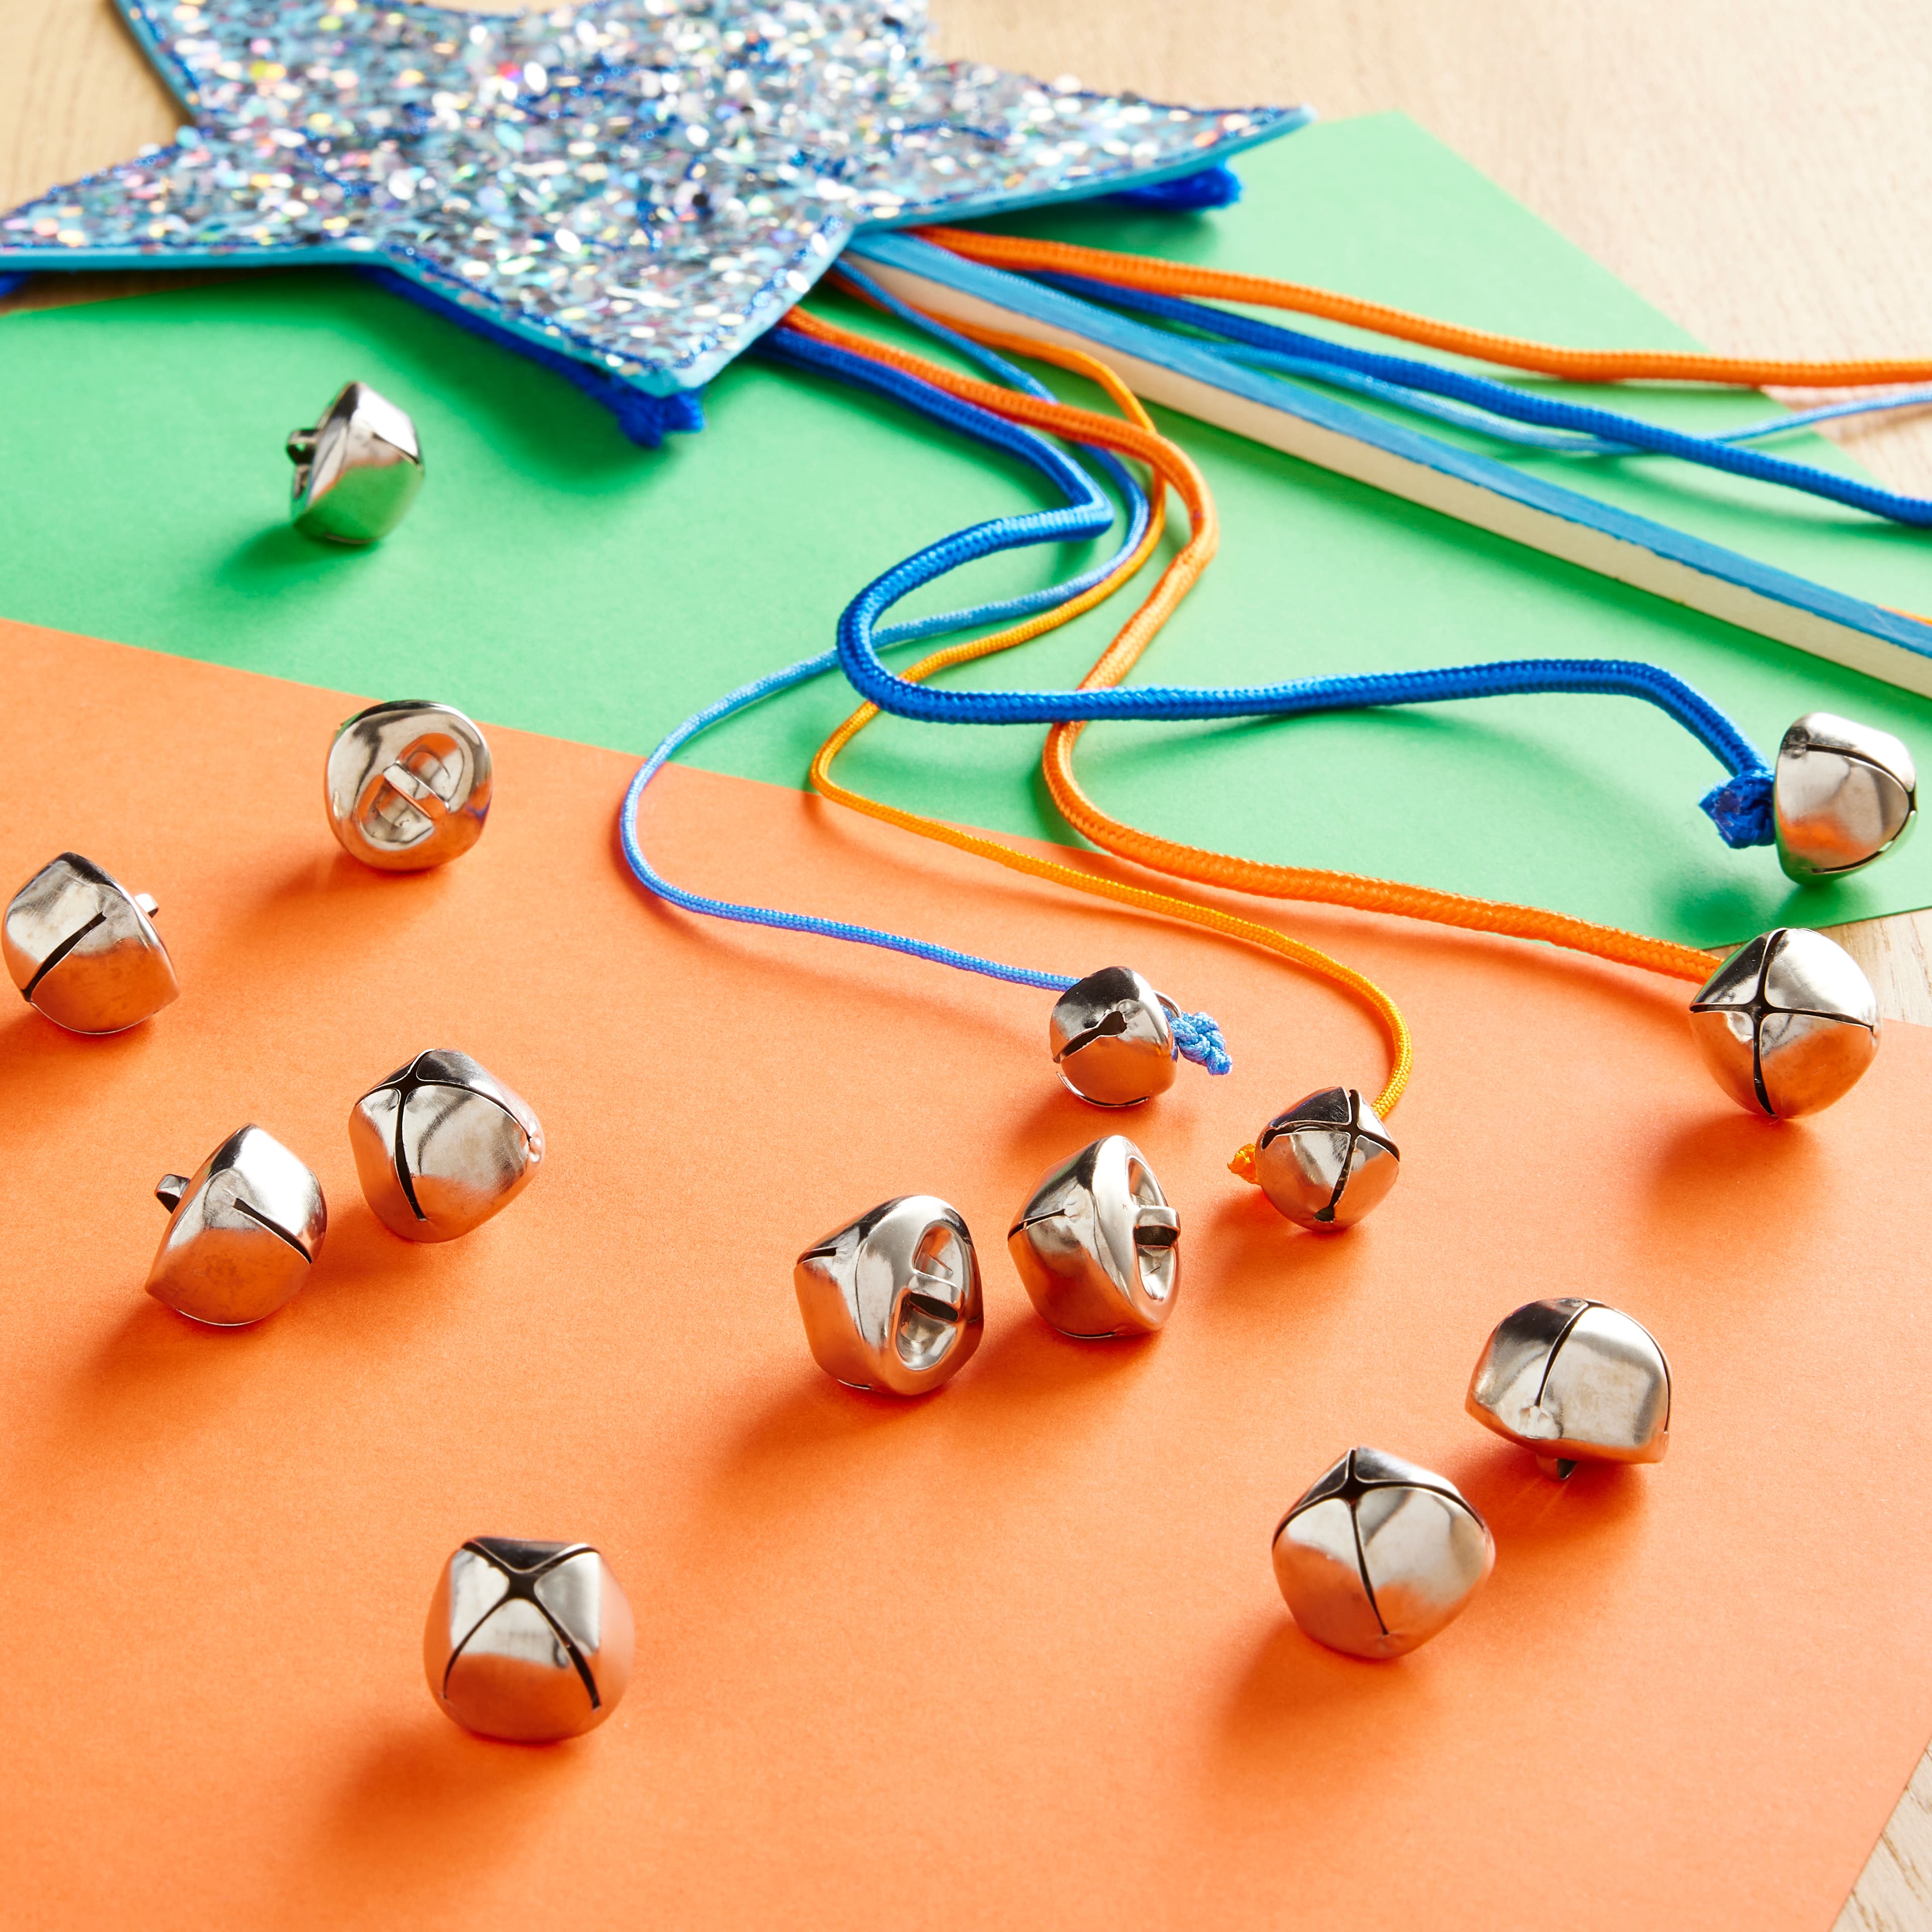 Jingle Bells Song, Crafts, and Activities